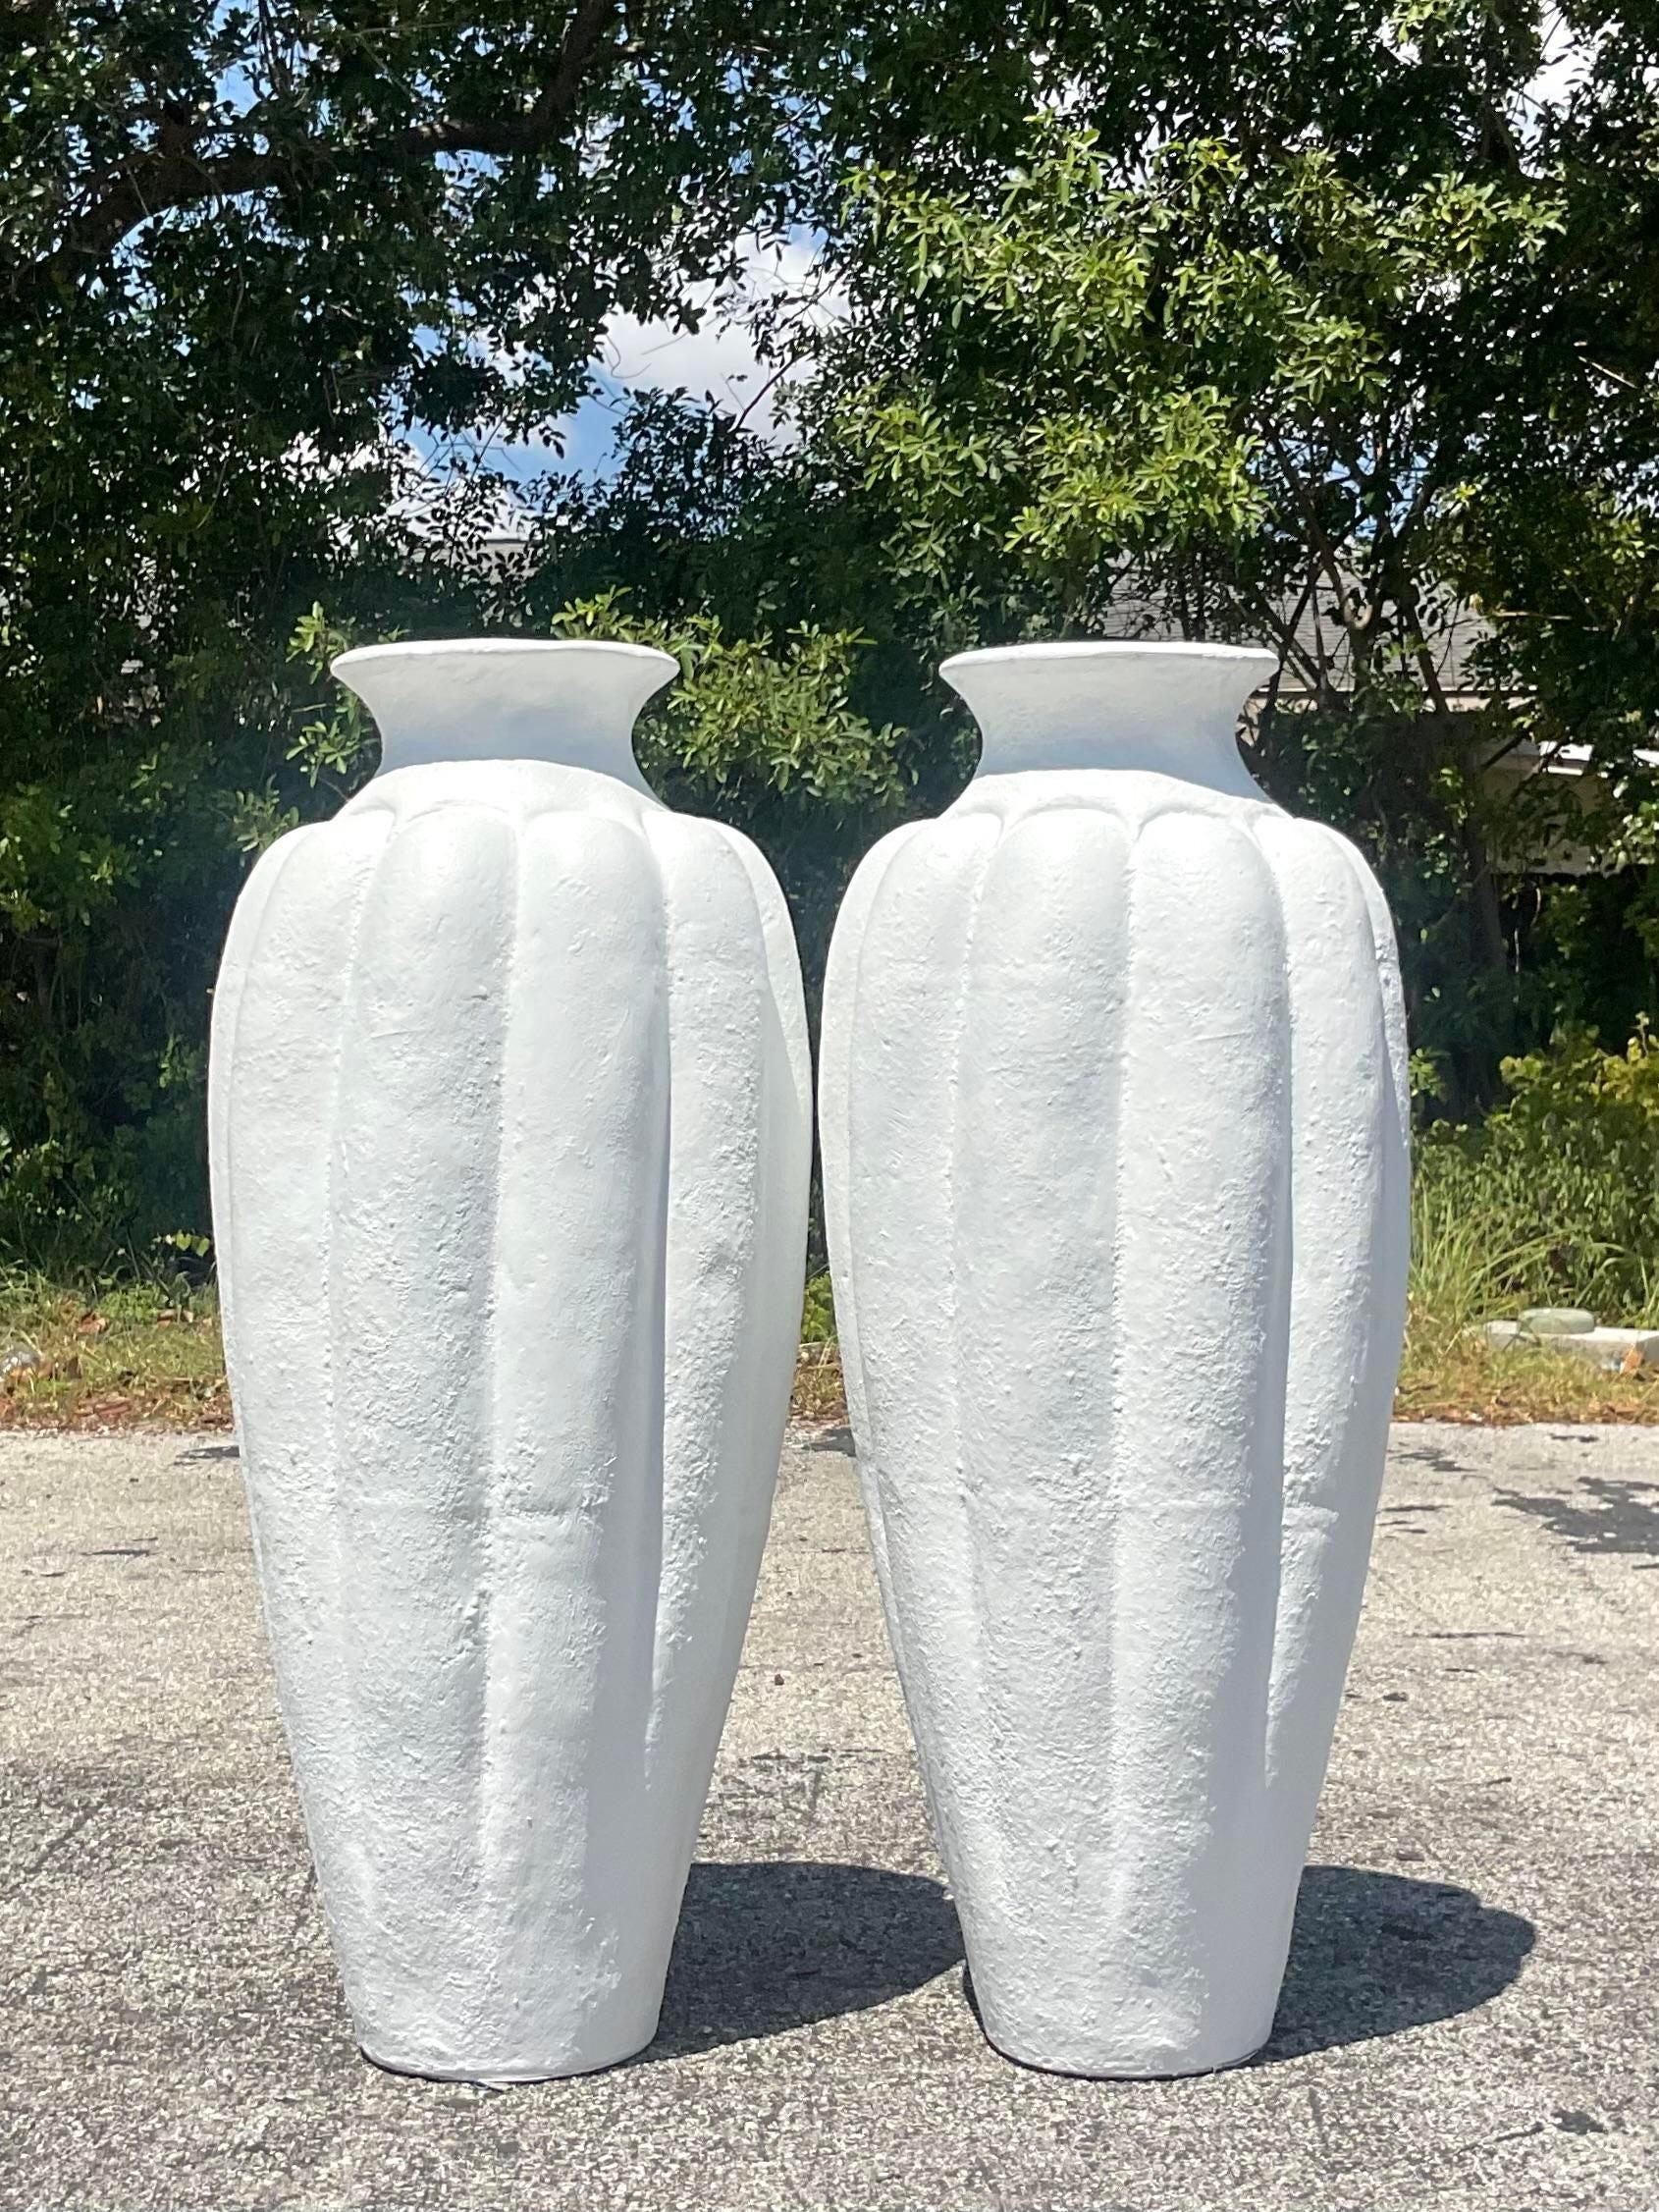 Transform your outdoor oasis with this exquisite pair of Vintage Painted Terrace Cotta Urns. With their timeless charm and classic American appeal, these urns bring a touch of old-world elegance to any garden or patio, creating a picturesque